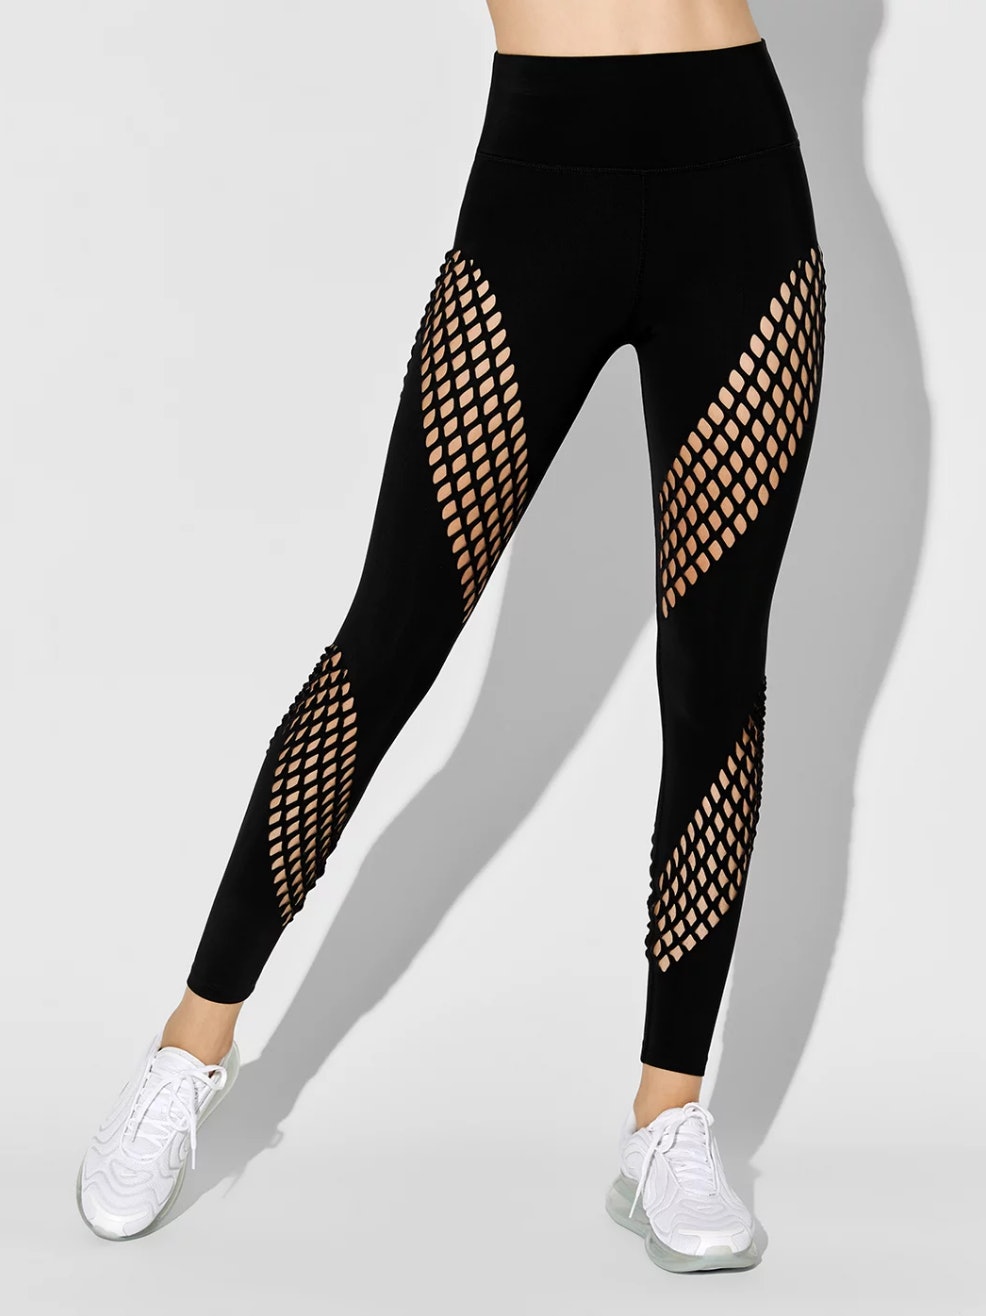 🆕 DION LEE X CARBON38 High Rise Seamless Contrast Leggings XS/S